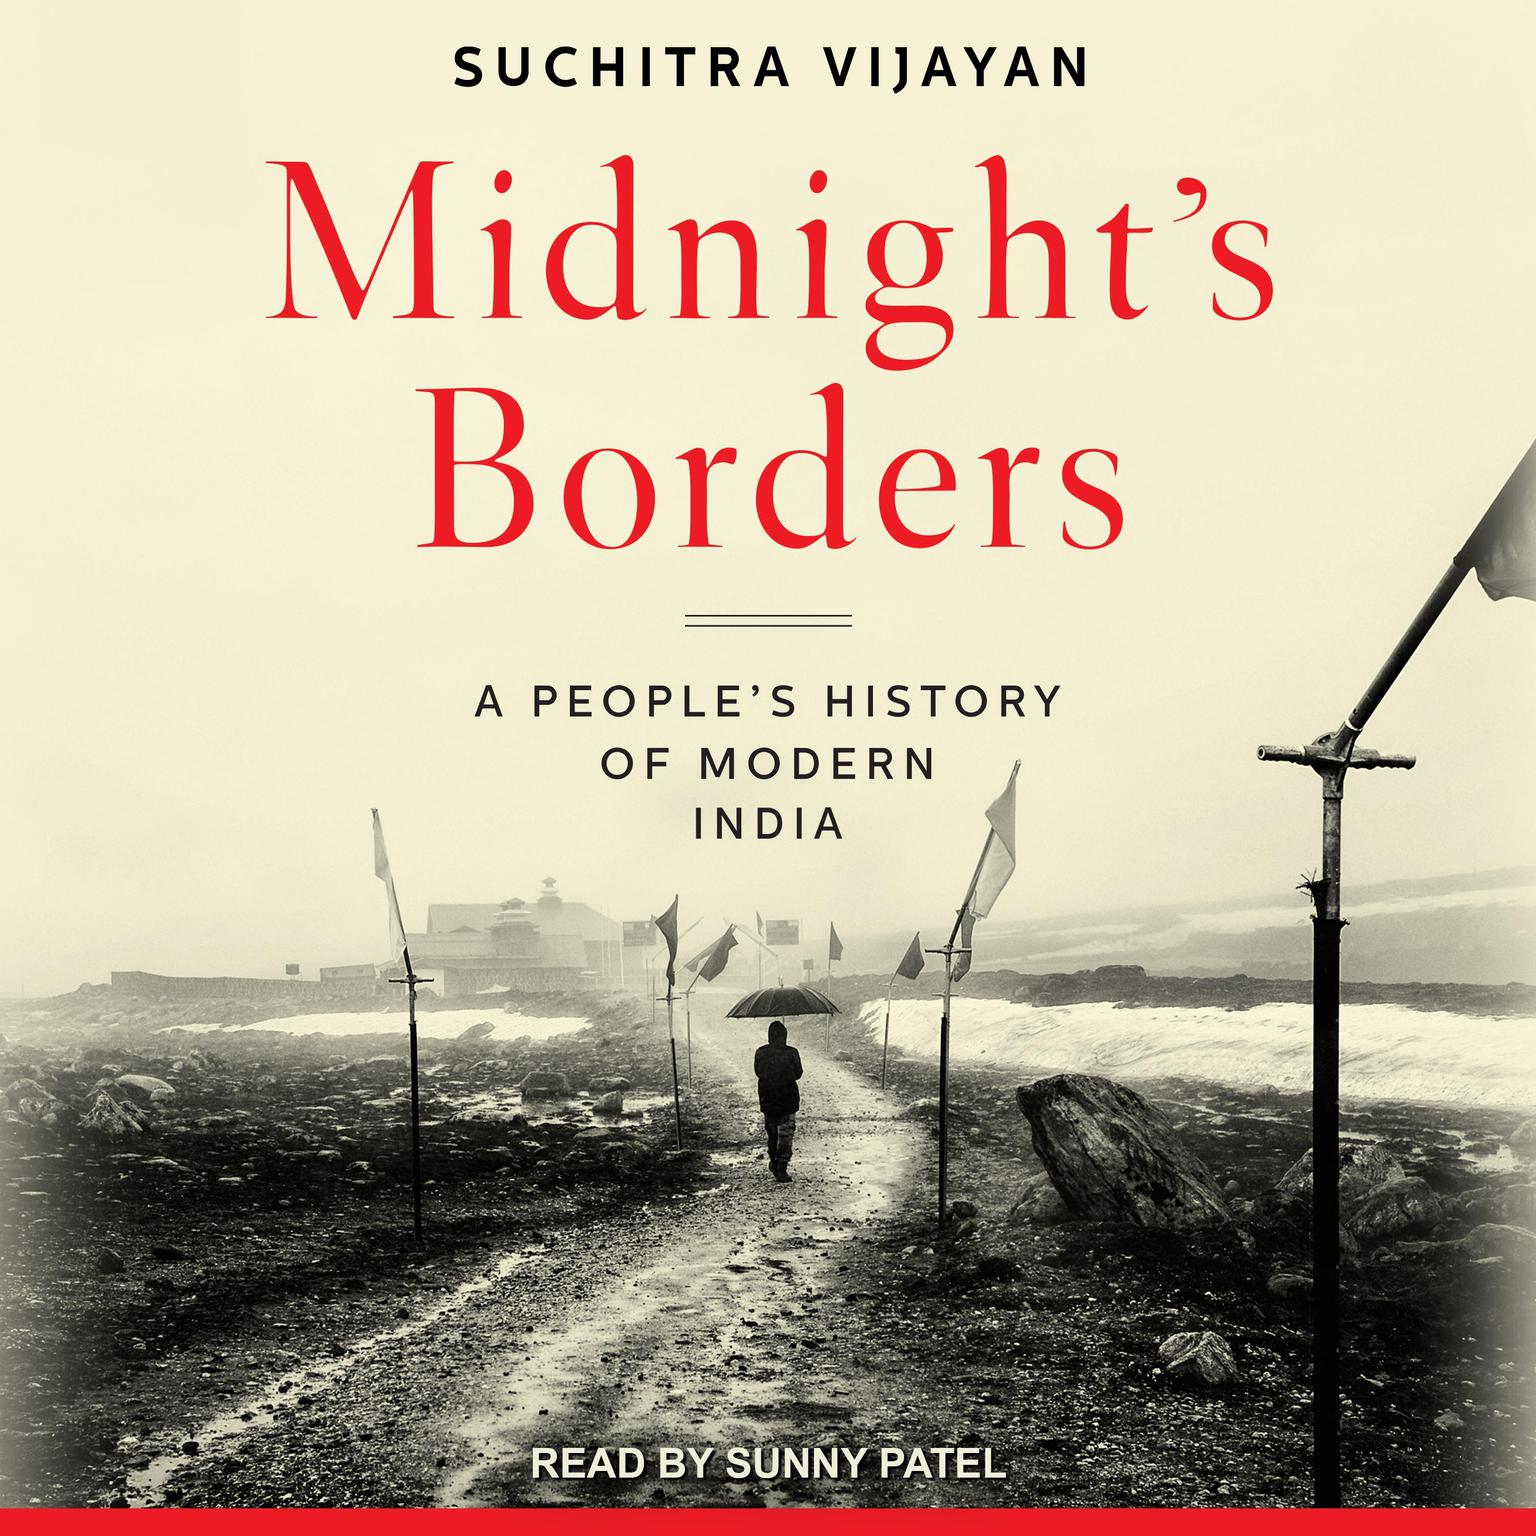 Midnights Borders: A Peoples History of Modern India Audiobook, by Suchitra Vijayan